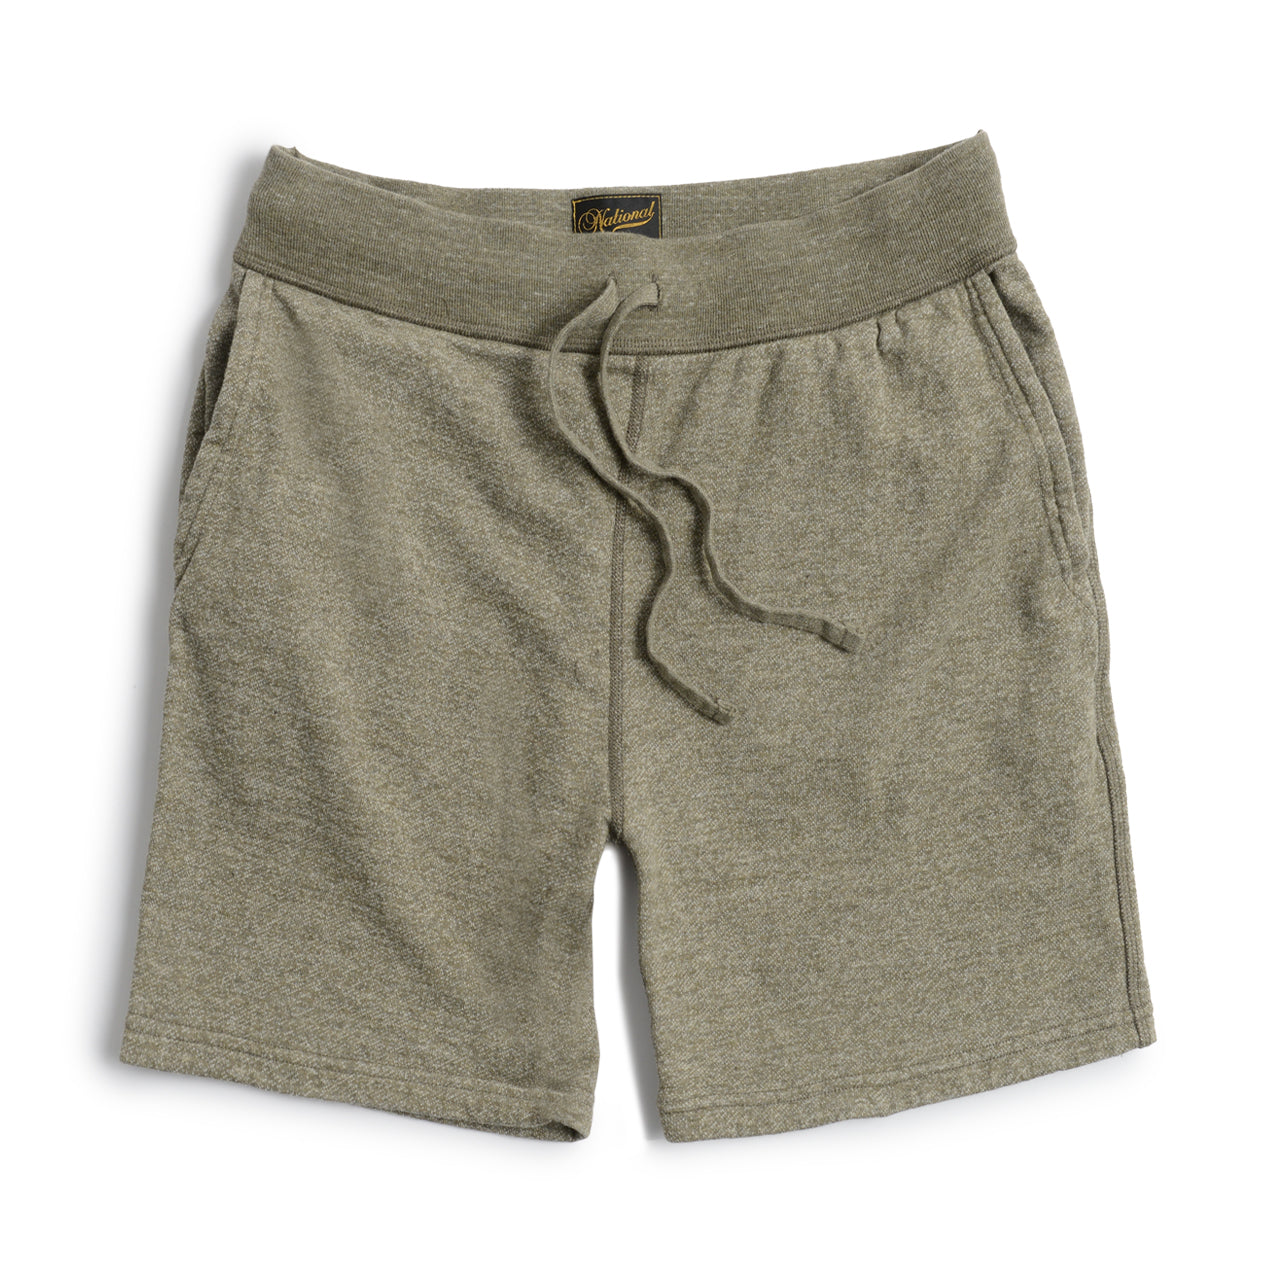 Men's Terry Shorts Made in Peru with Alpaca